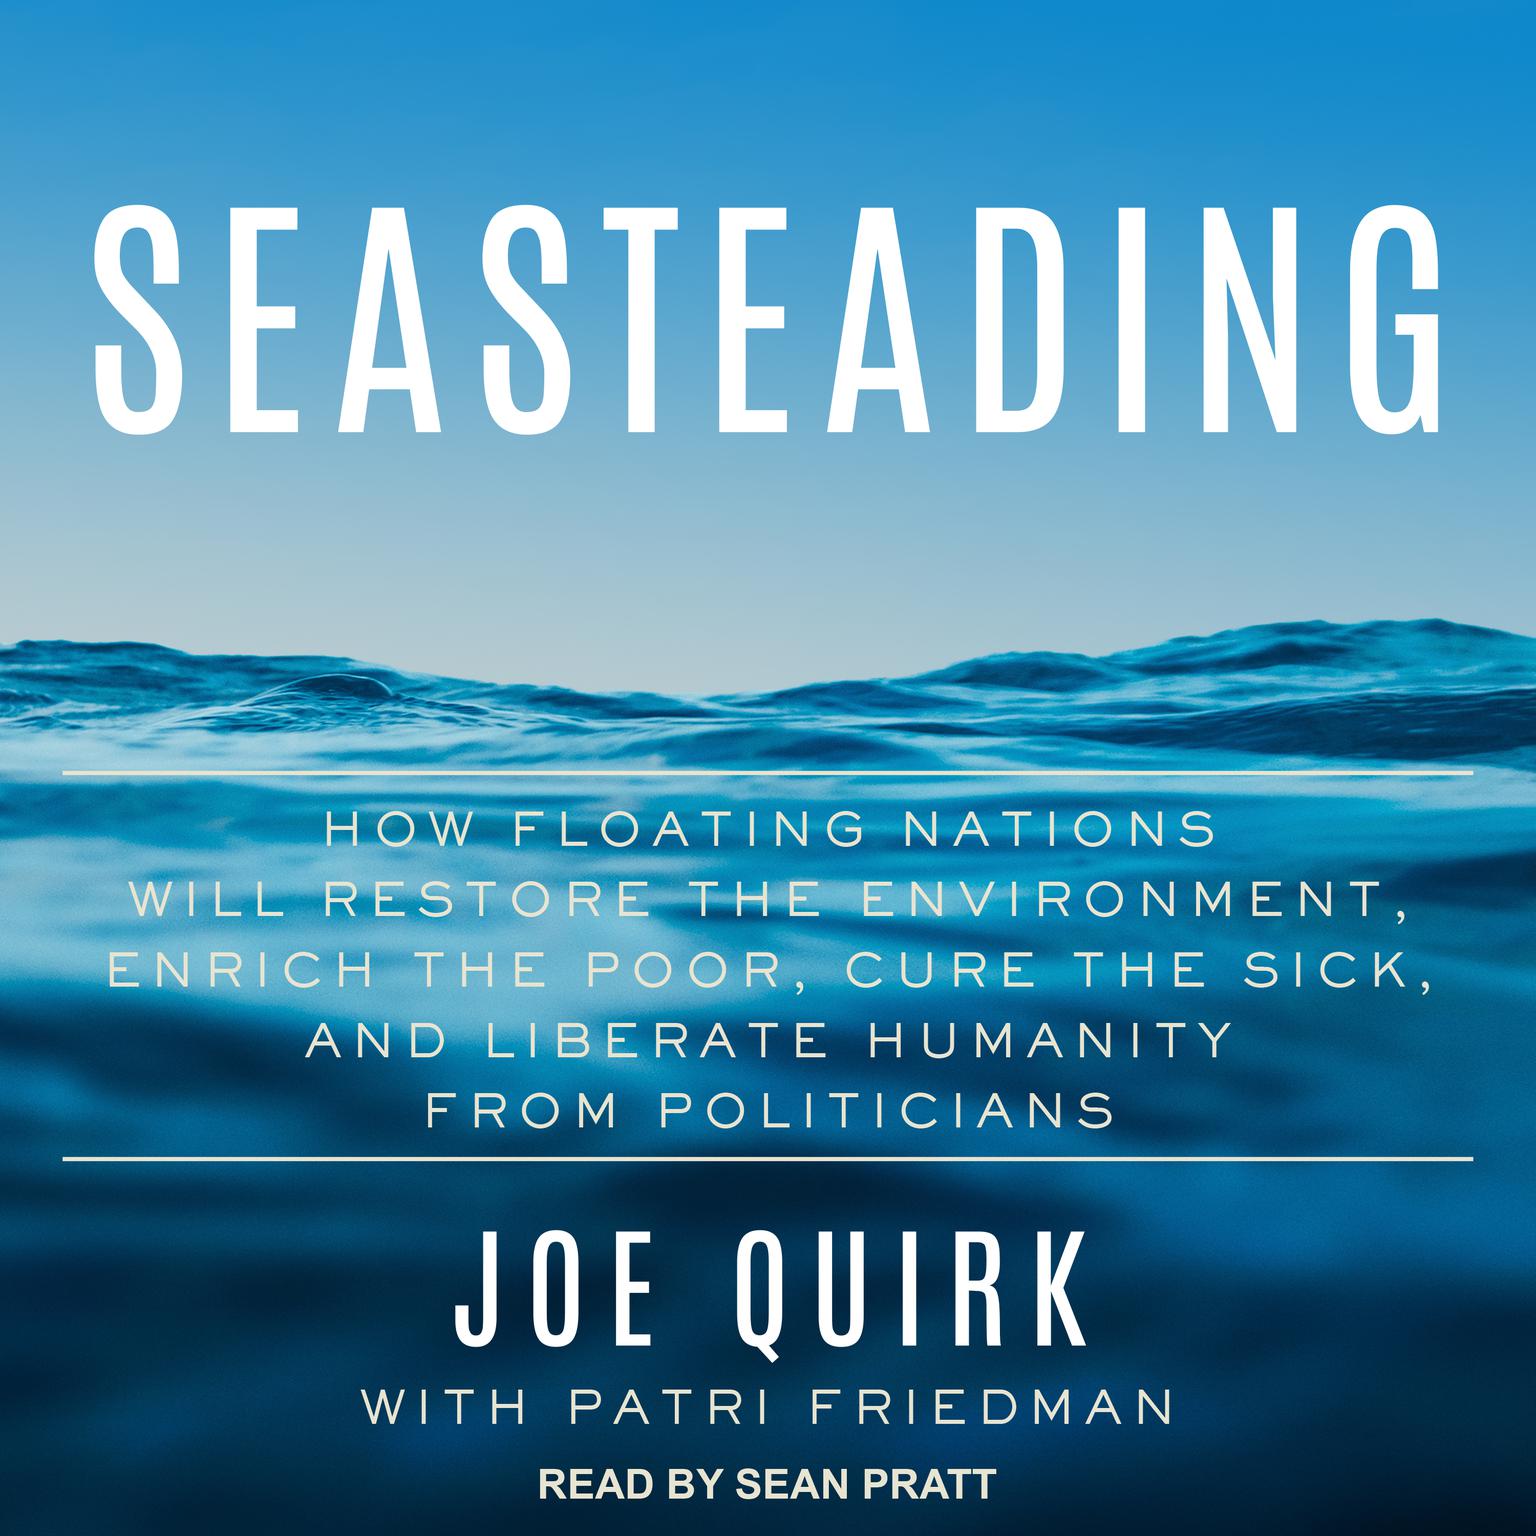 Seasteading: How Floating Nations Will Restore the Environment, Enrich the Poor, Cure the Sick, and Liberate Humanity from Politicians Audiobook, by Joe Quirk